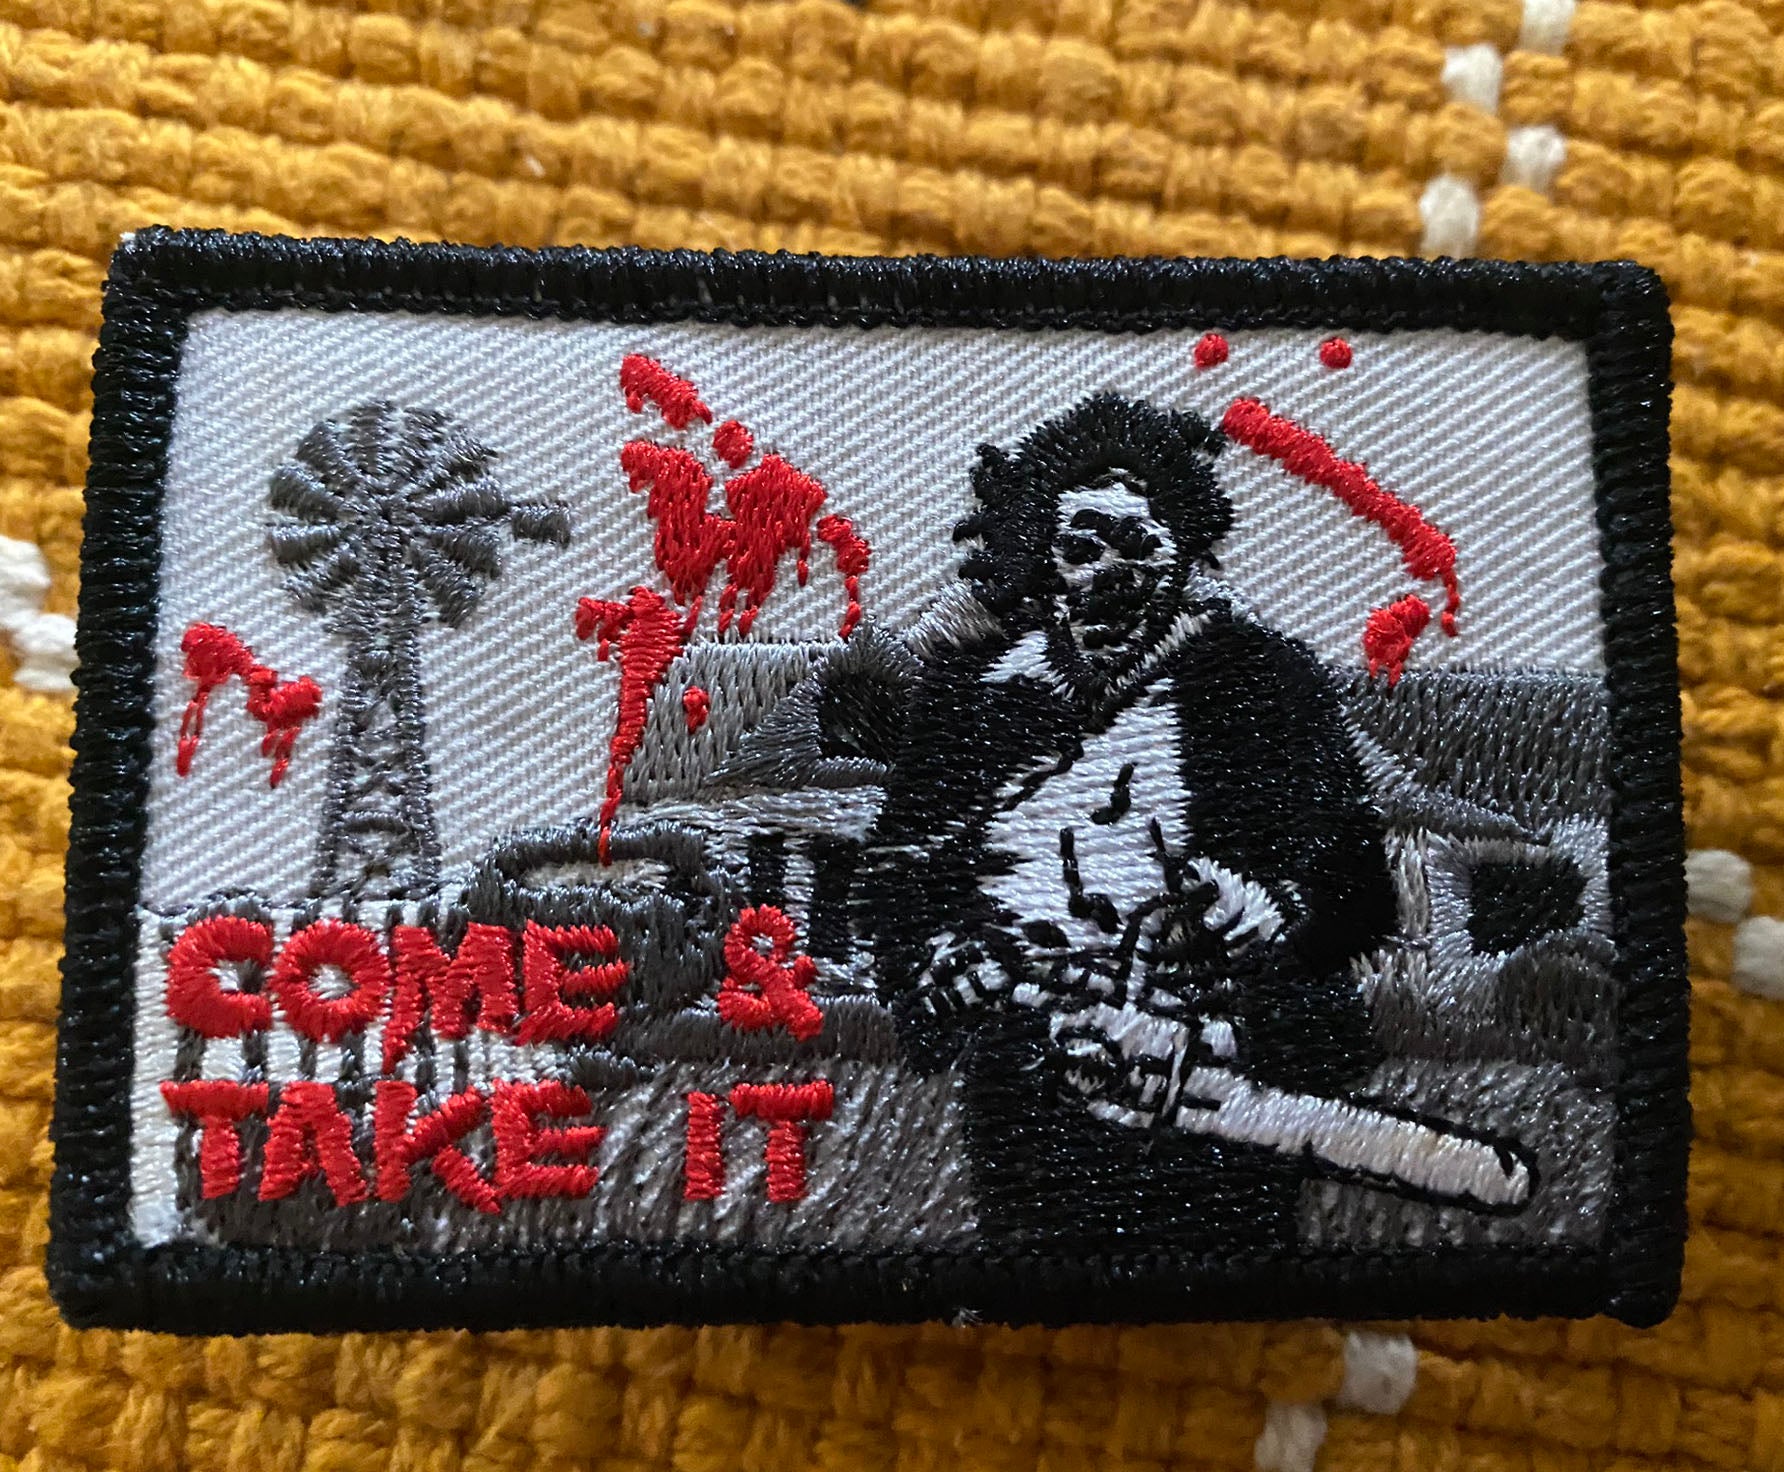 "Come and Take It" Texas Chainsaw Patch